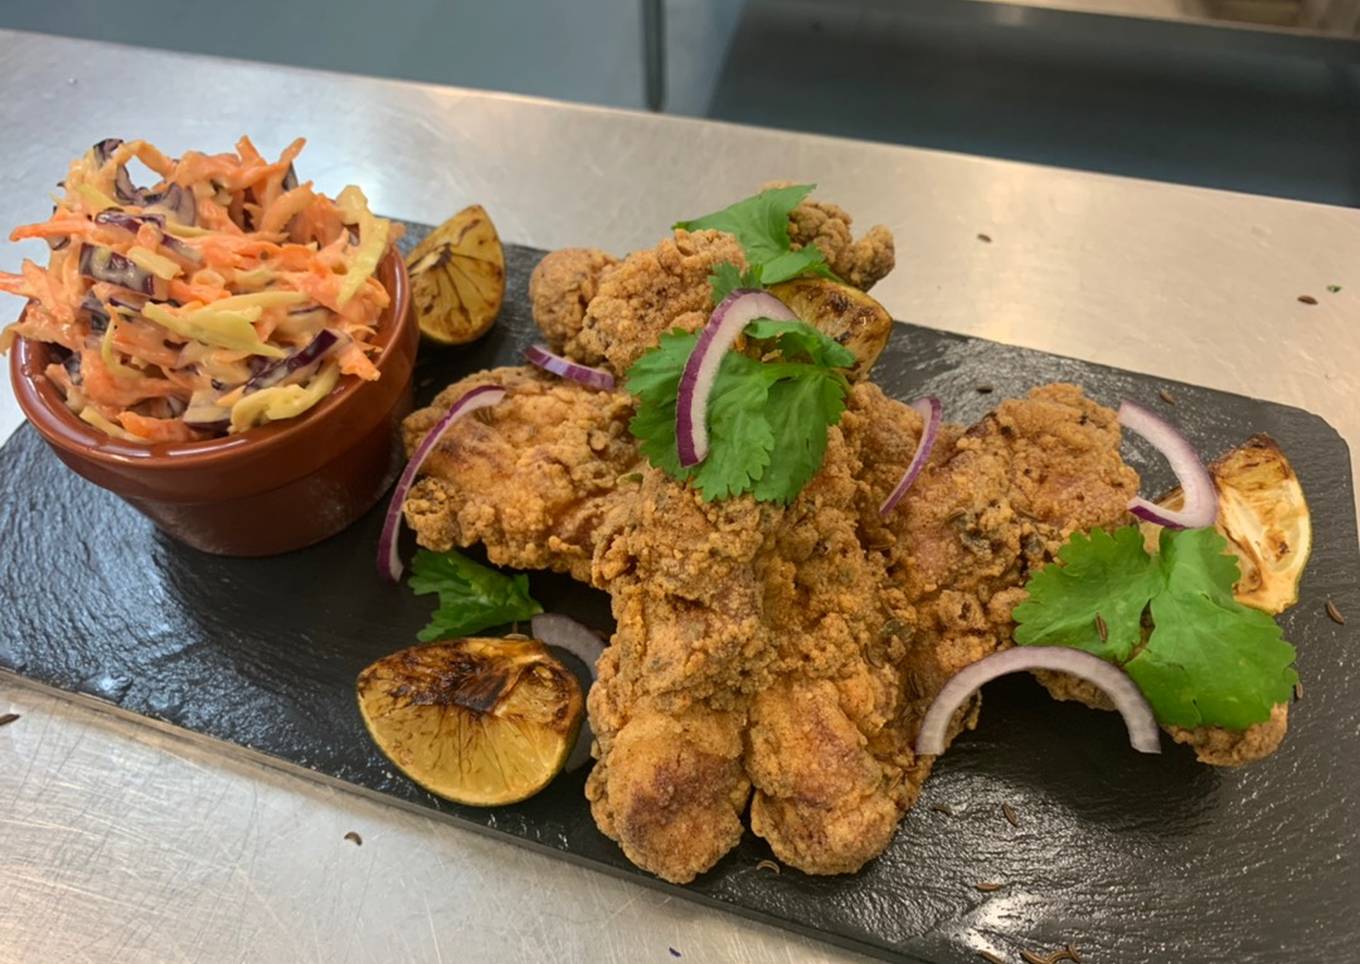 Southern Fried Chicken with Texas slaw